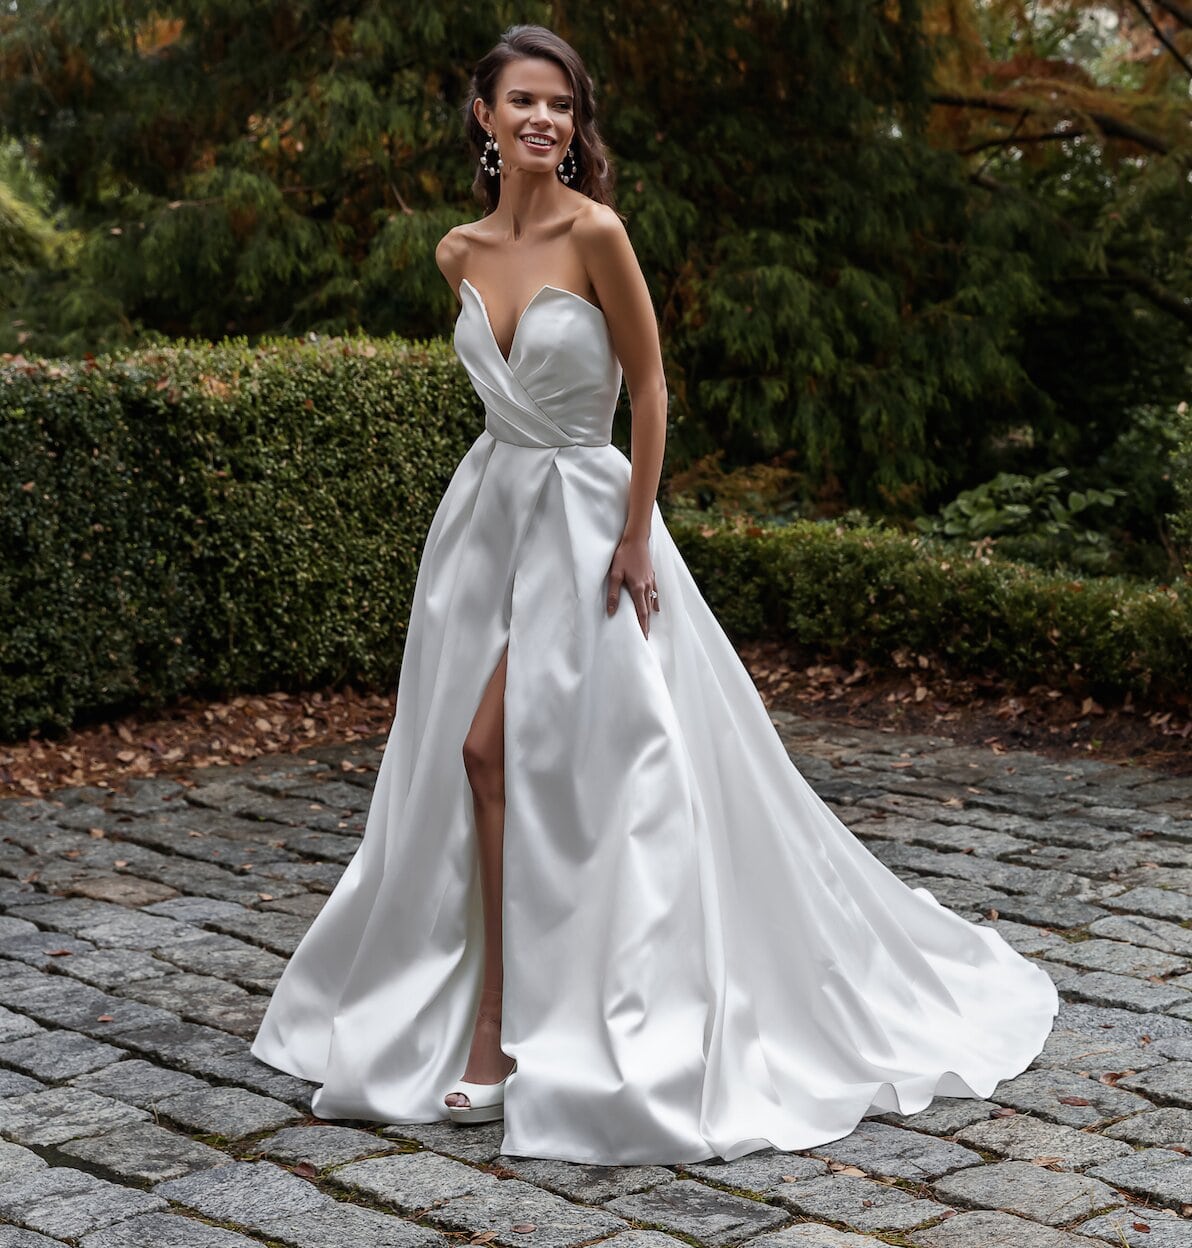 Amazing Simple Silk Wedding Dress of the decade Don t miss out 